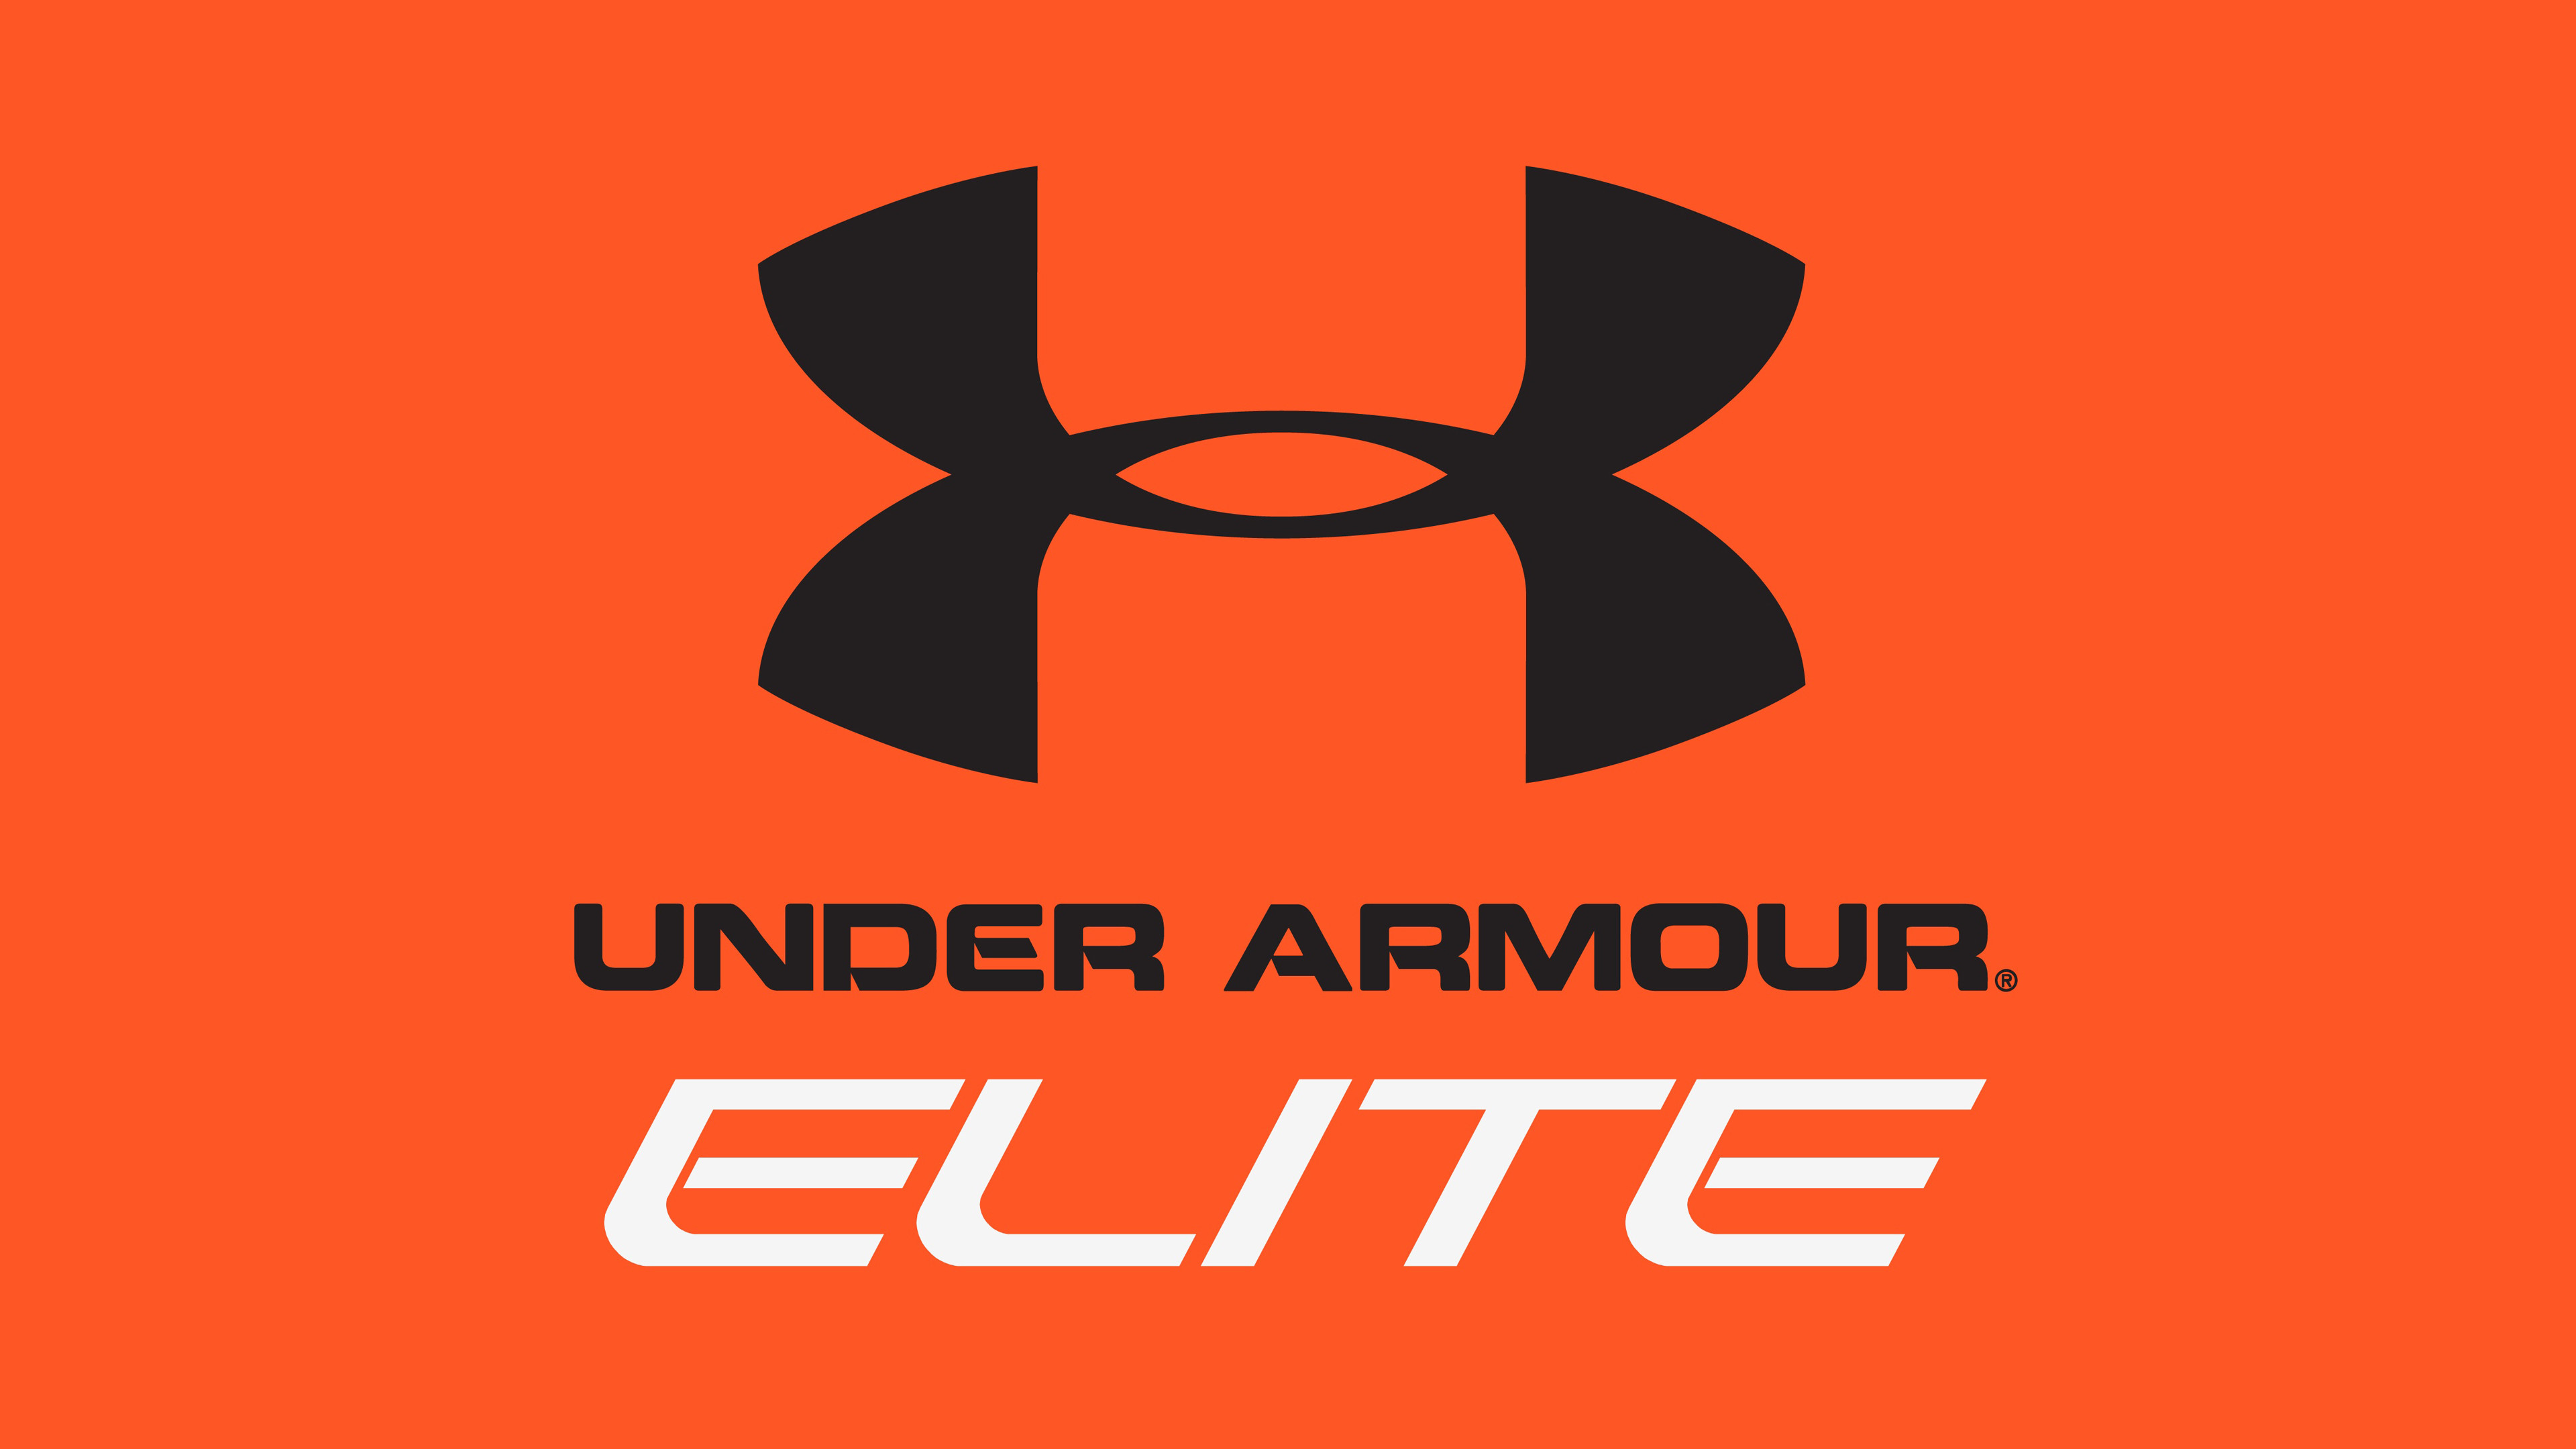 3840x2160 ... Cool Under Armour Wallpapers 03 of 40 with Elite Logo